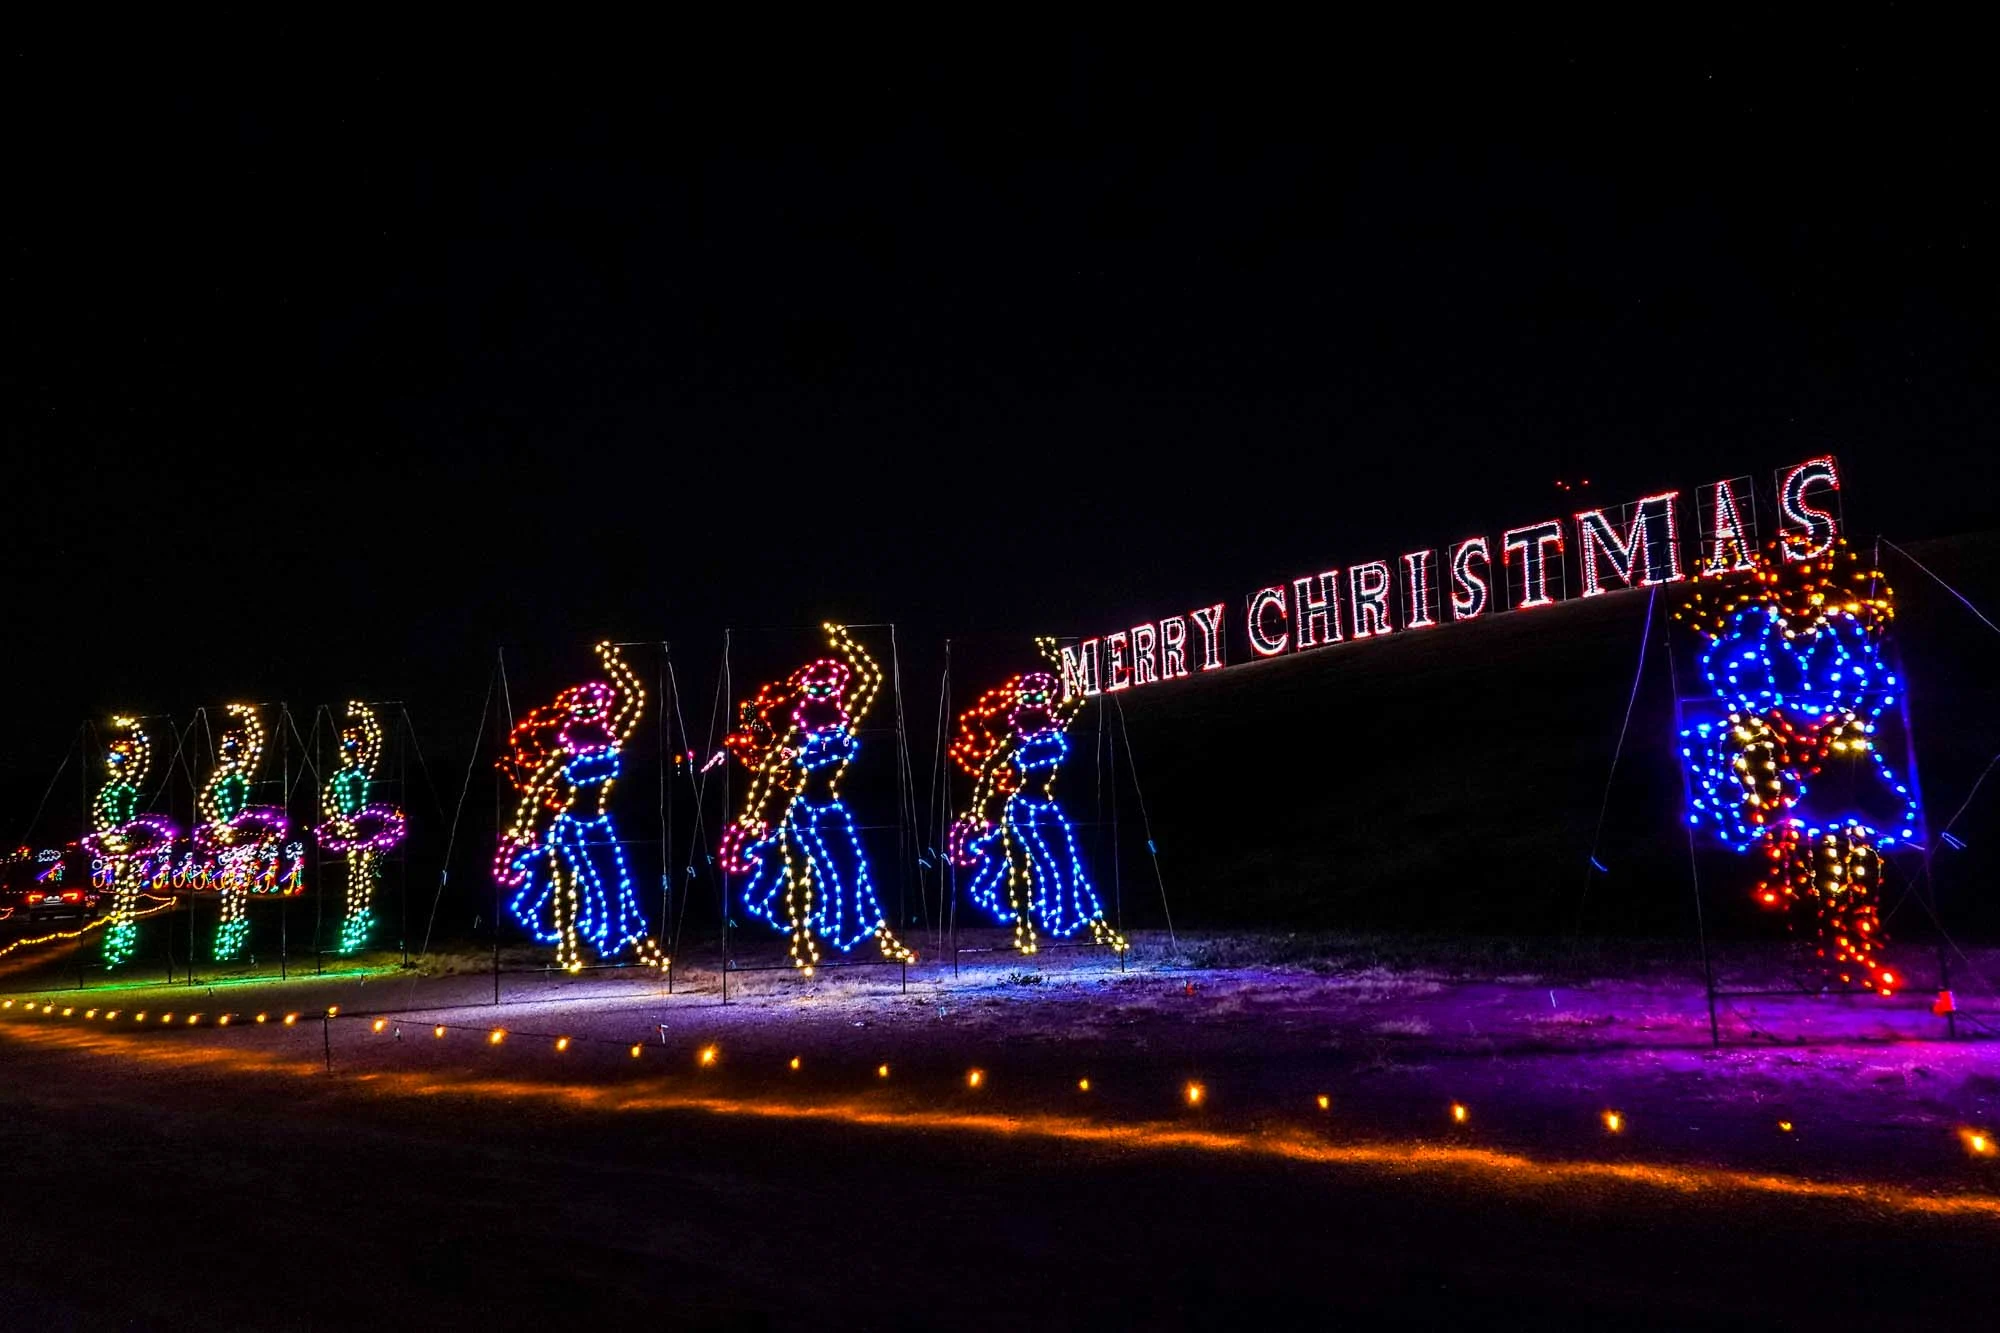 Christmas lights shaped like dancing women in front of a lit up "Merry Christmas" sign